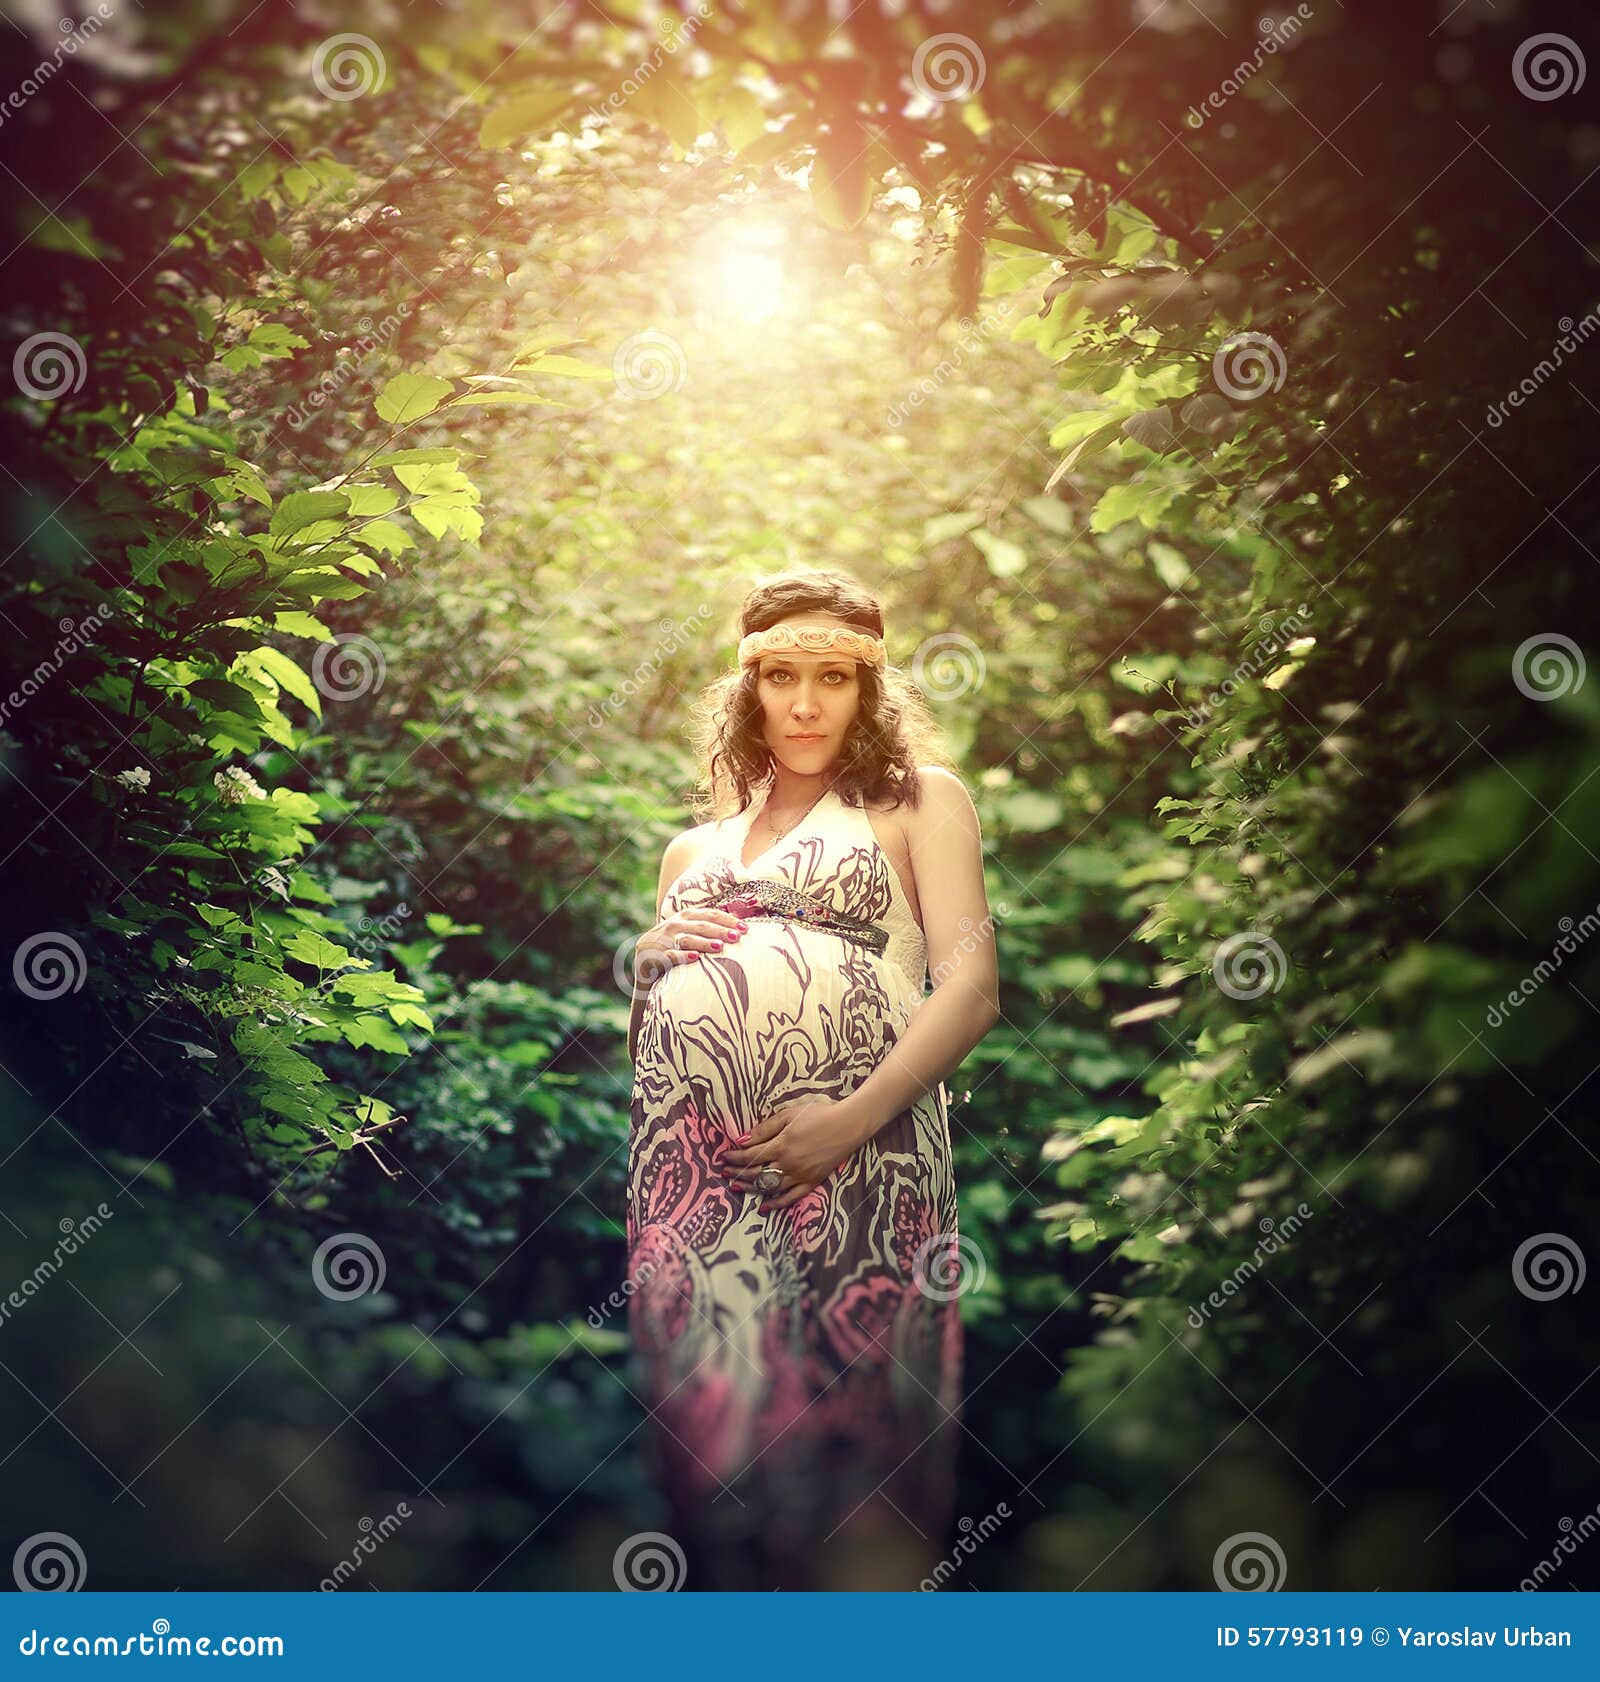 Romantic And Exciting Pregnant Woman Outside Stock Image Image Of